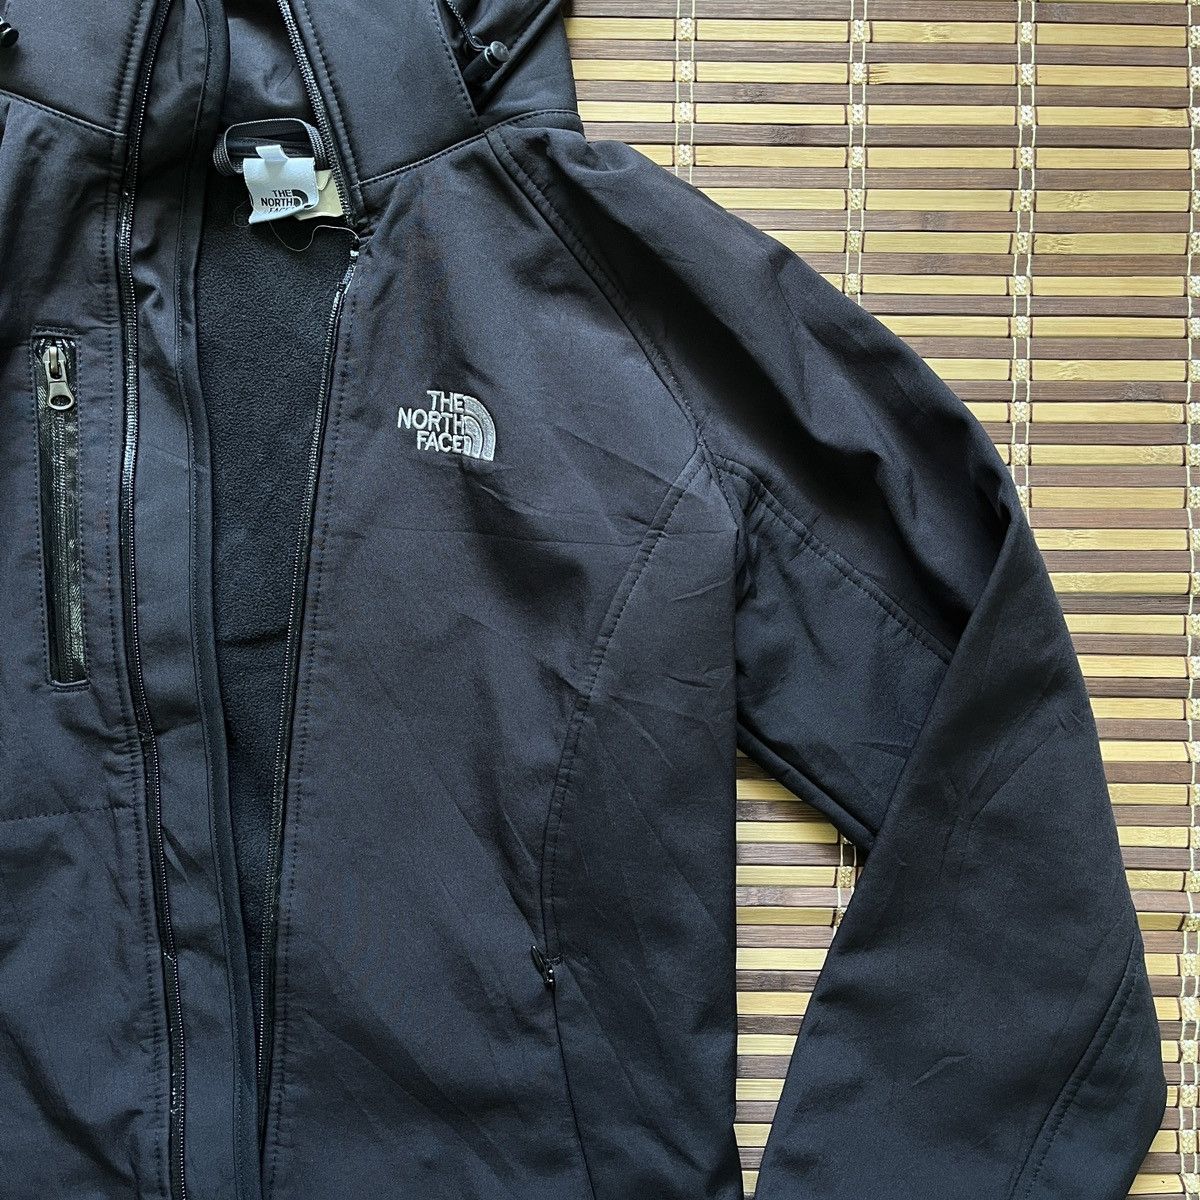 Outdoor Style Go Out! - The North Face X Goretex Summit Series Jacket - 6